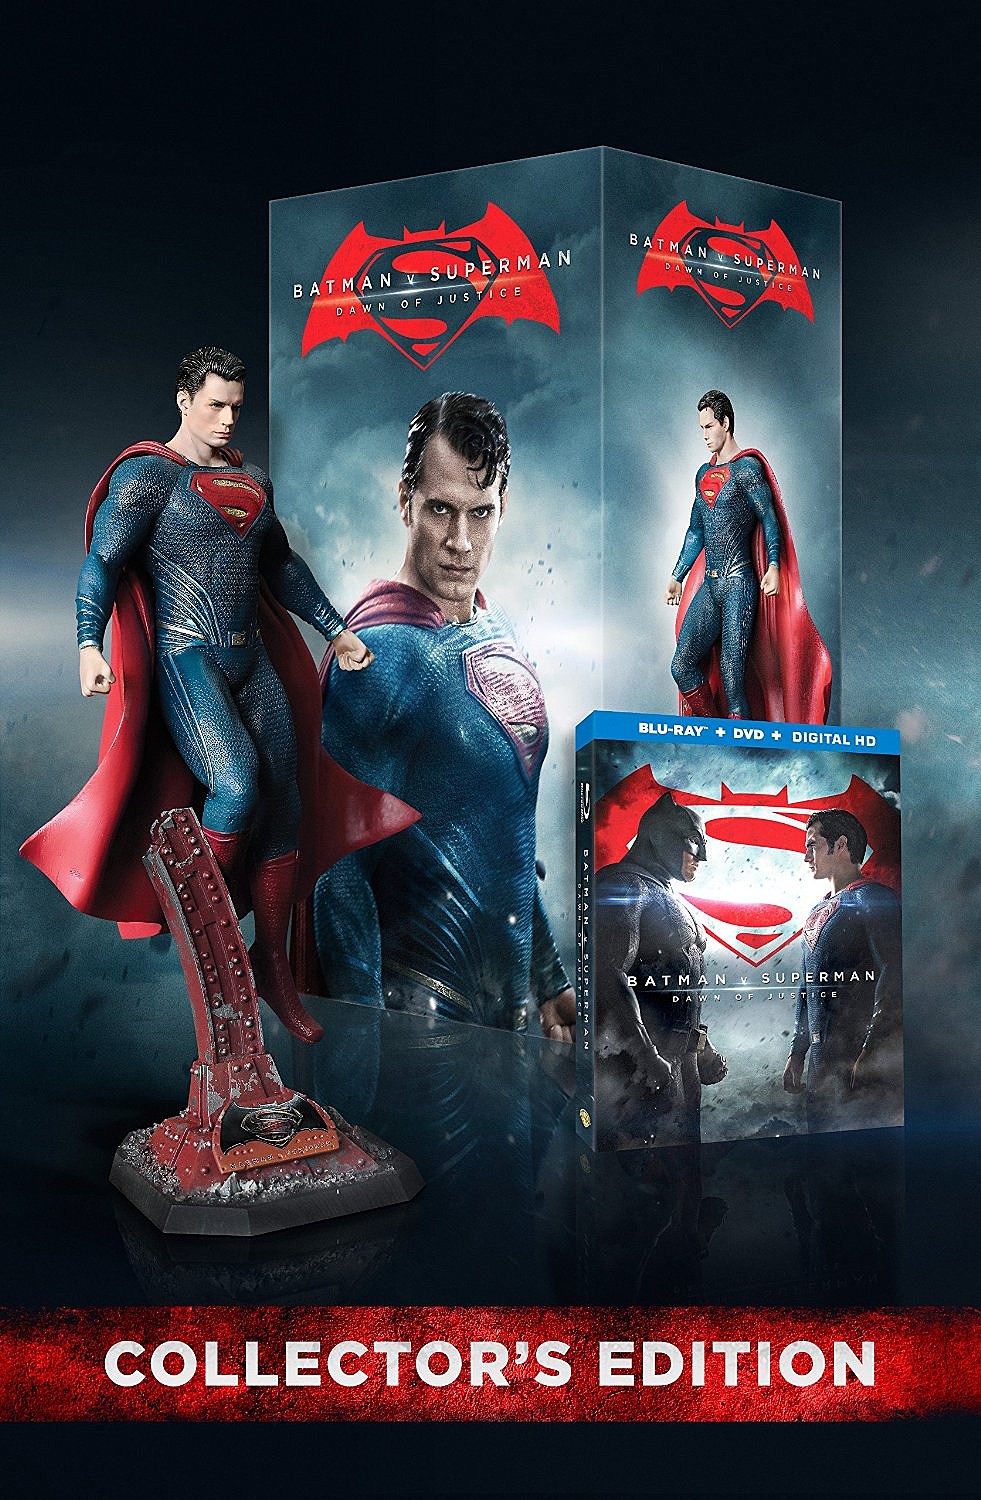 Superman Ultimate Collectors Edition DVD - YouTube